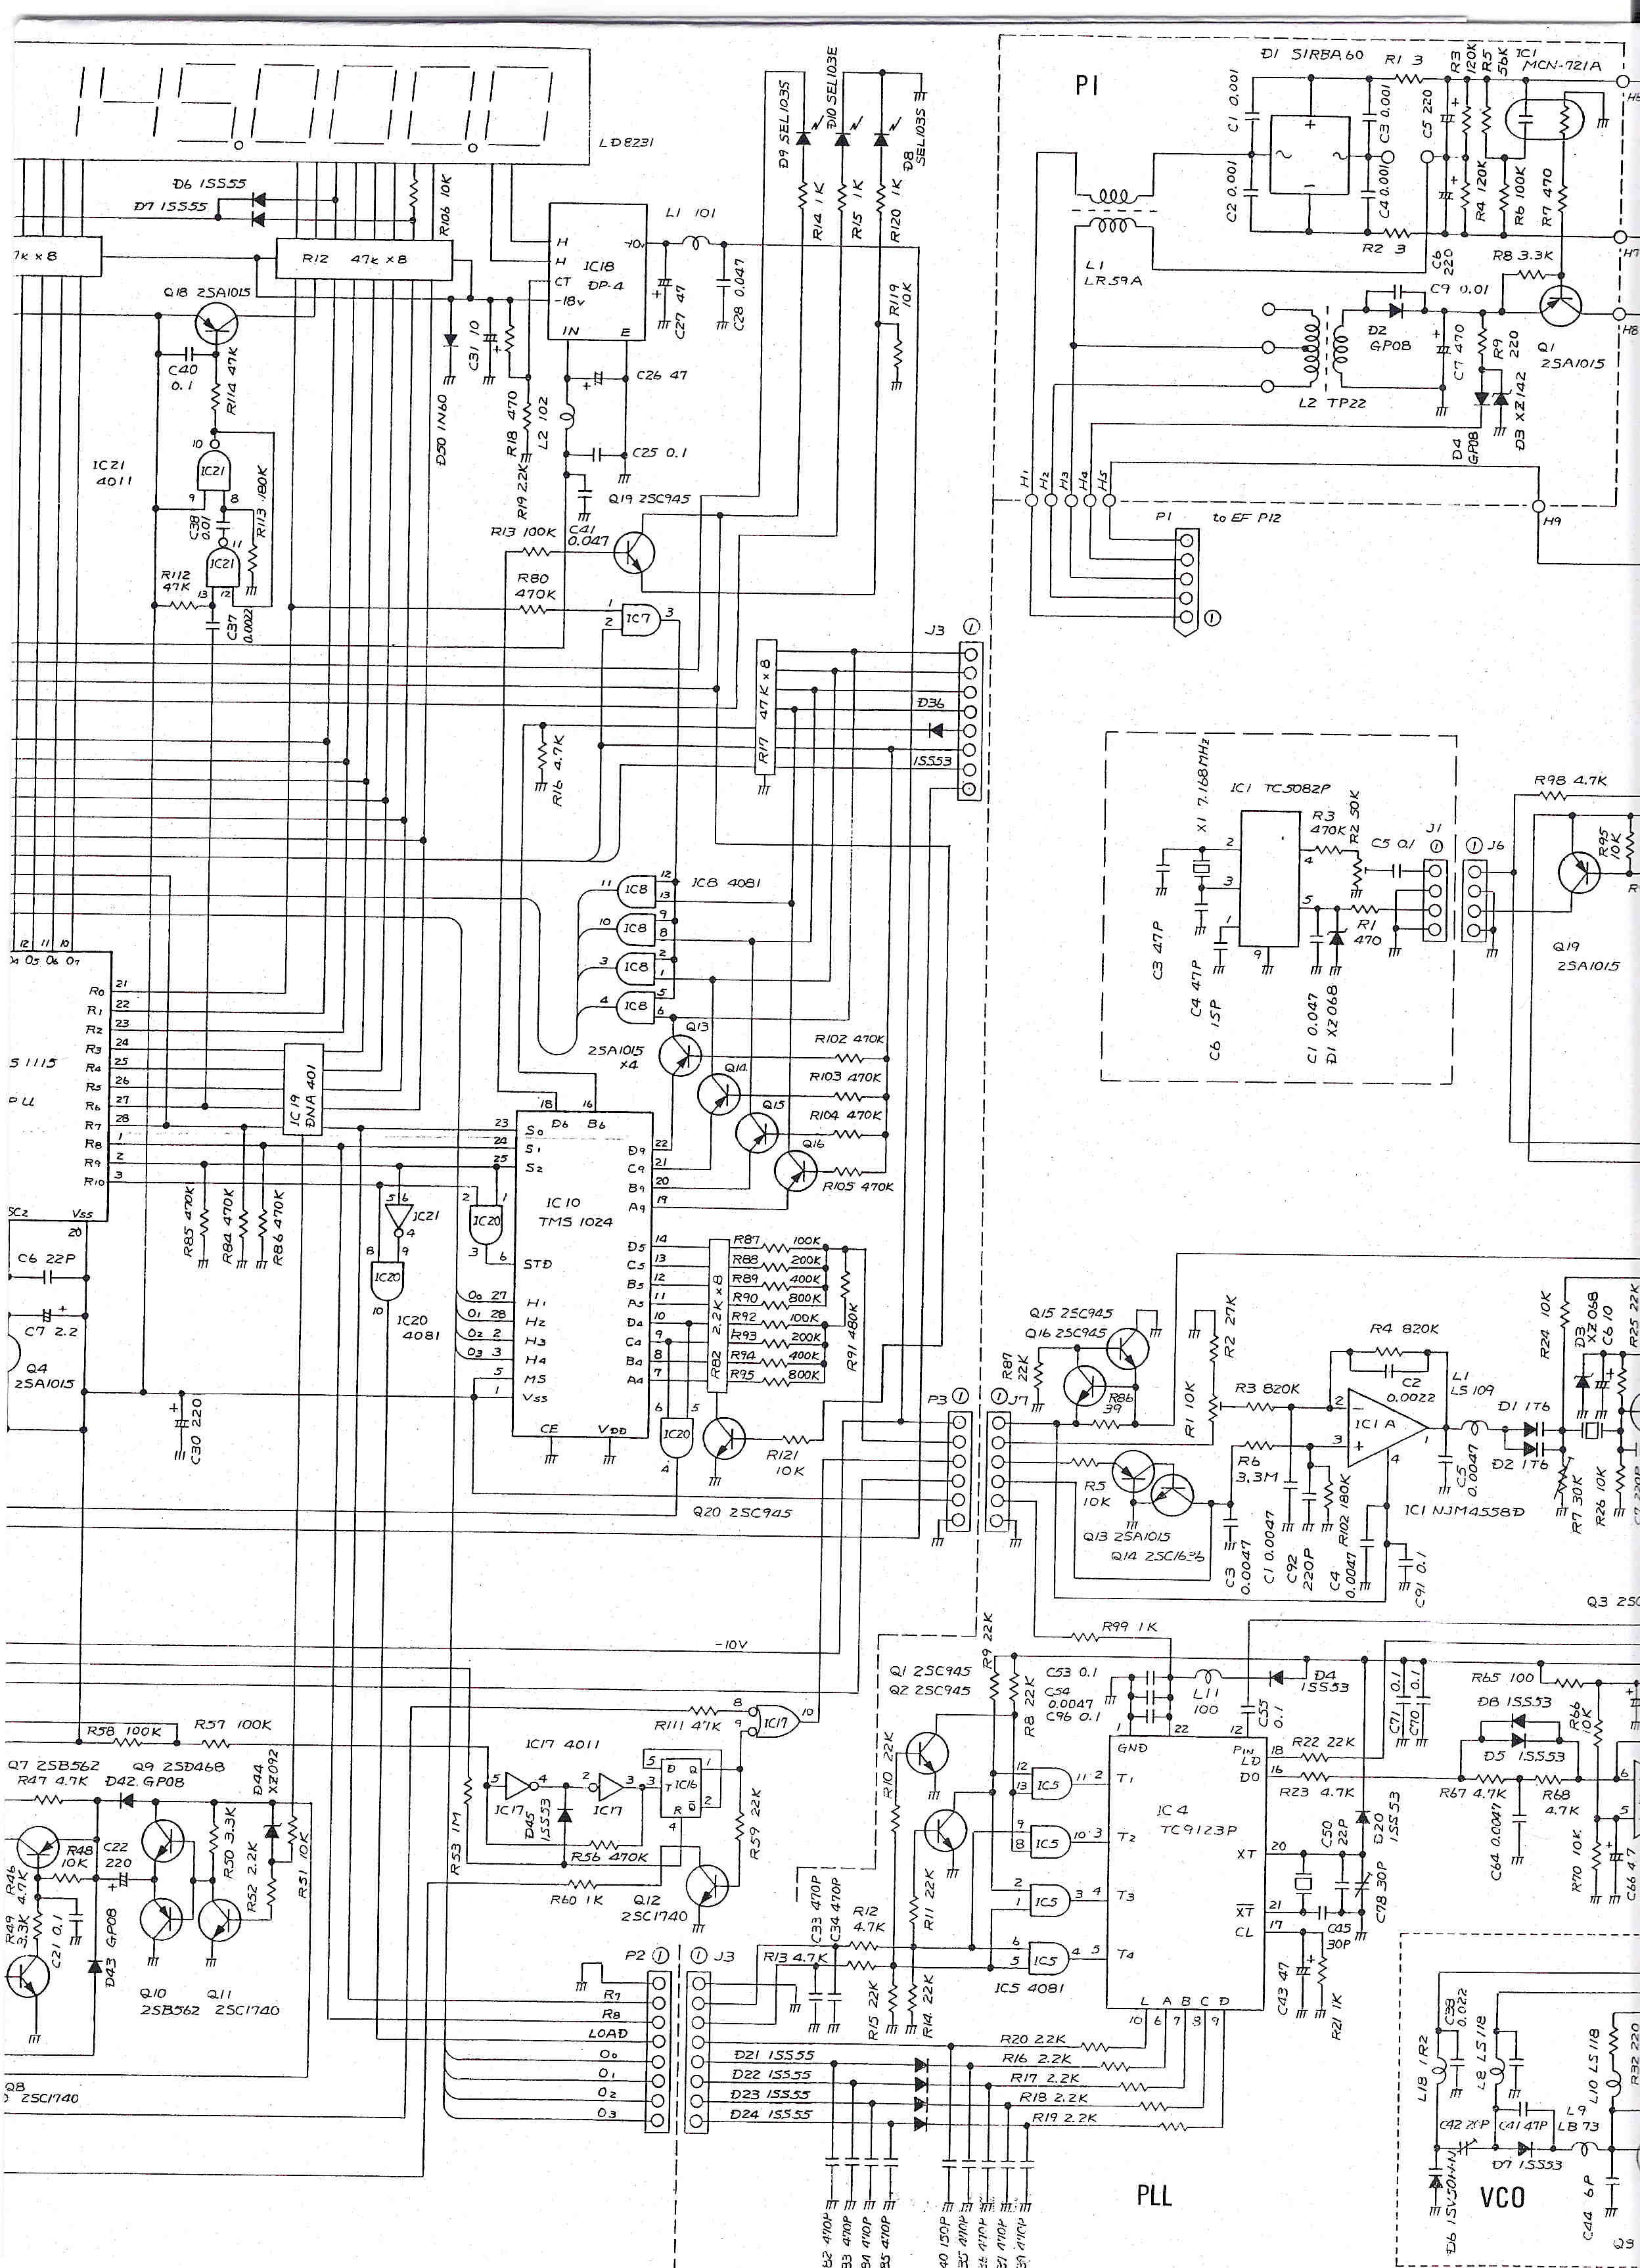 ICOM IC-251 Schematic diagram, scan two.